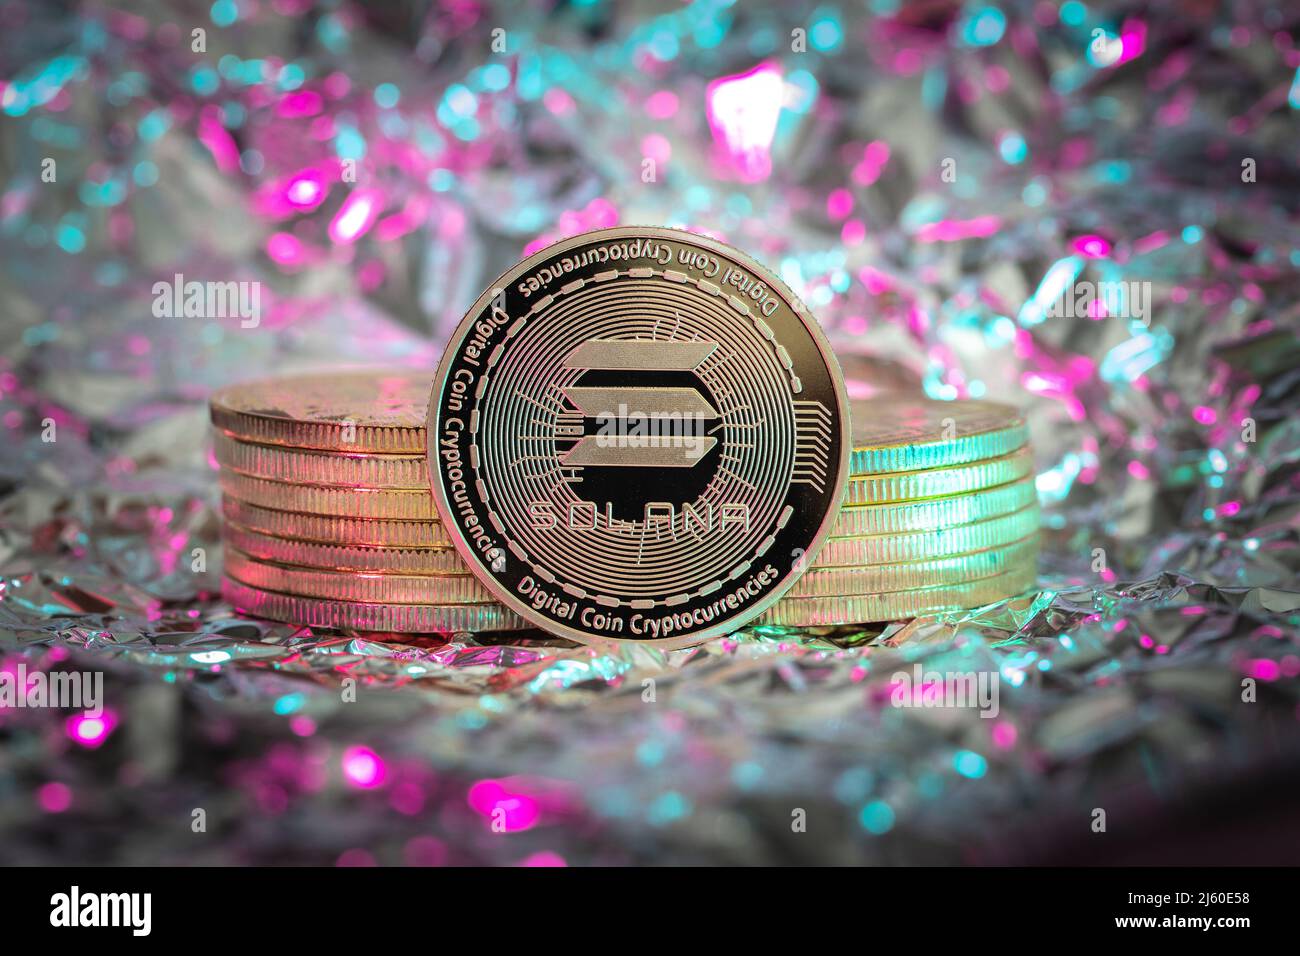 Solana SOL cryptocurrency physical coin, abstract background. Stock Photo